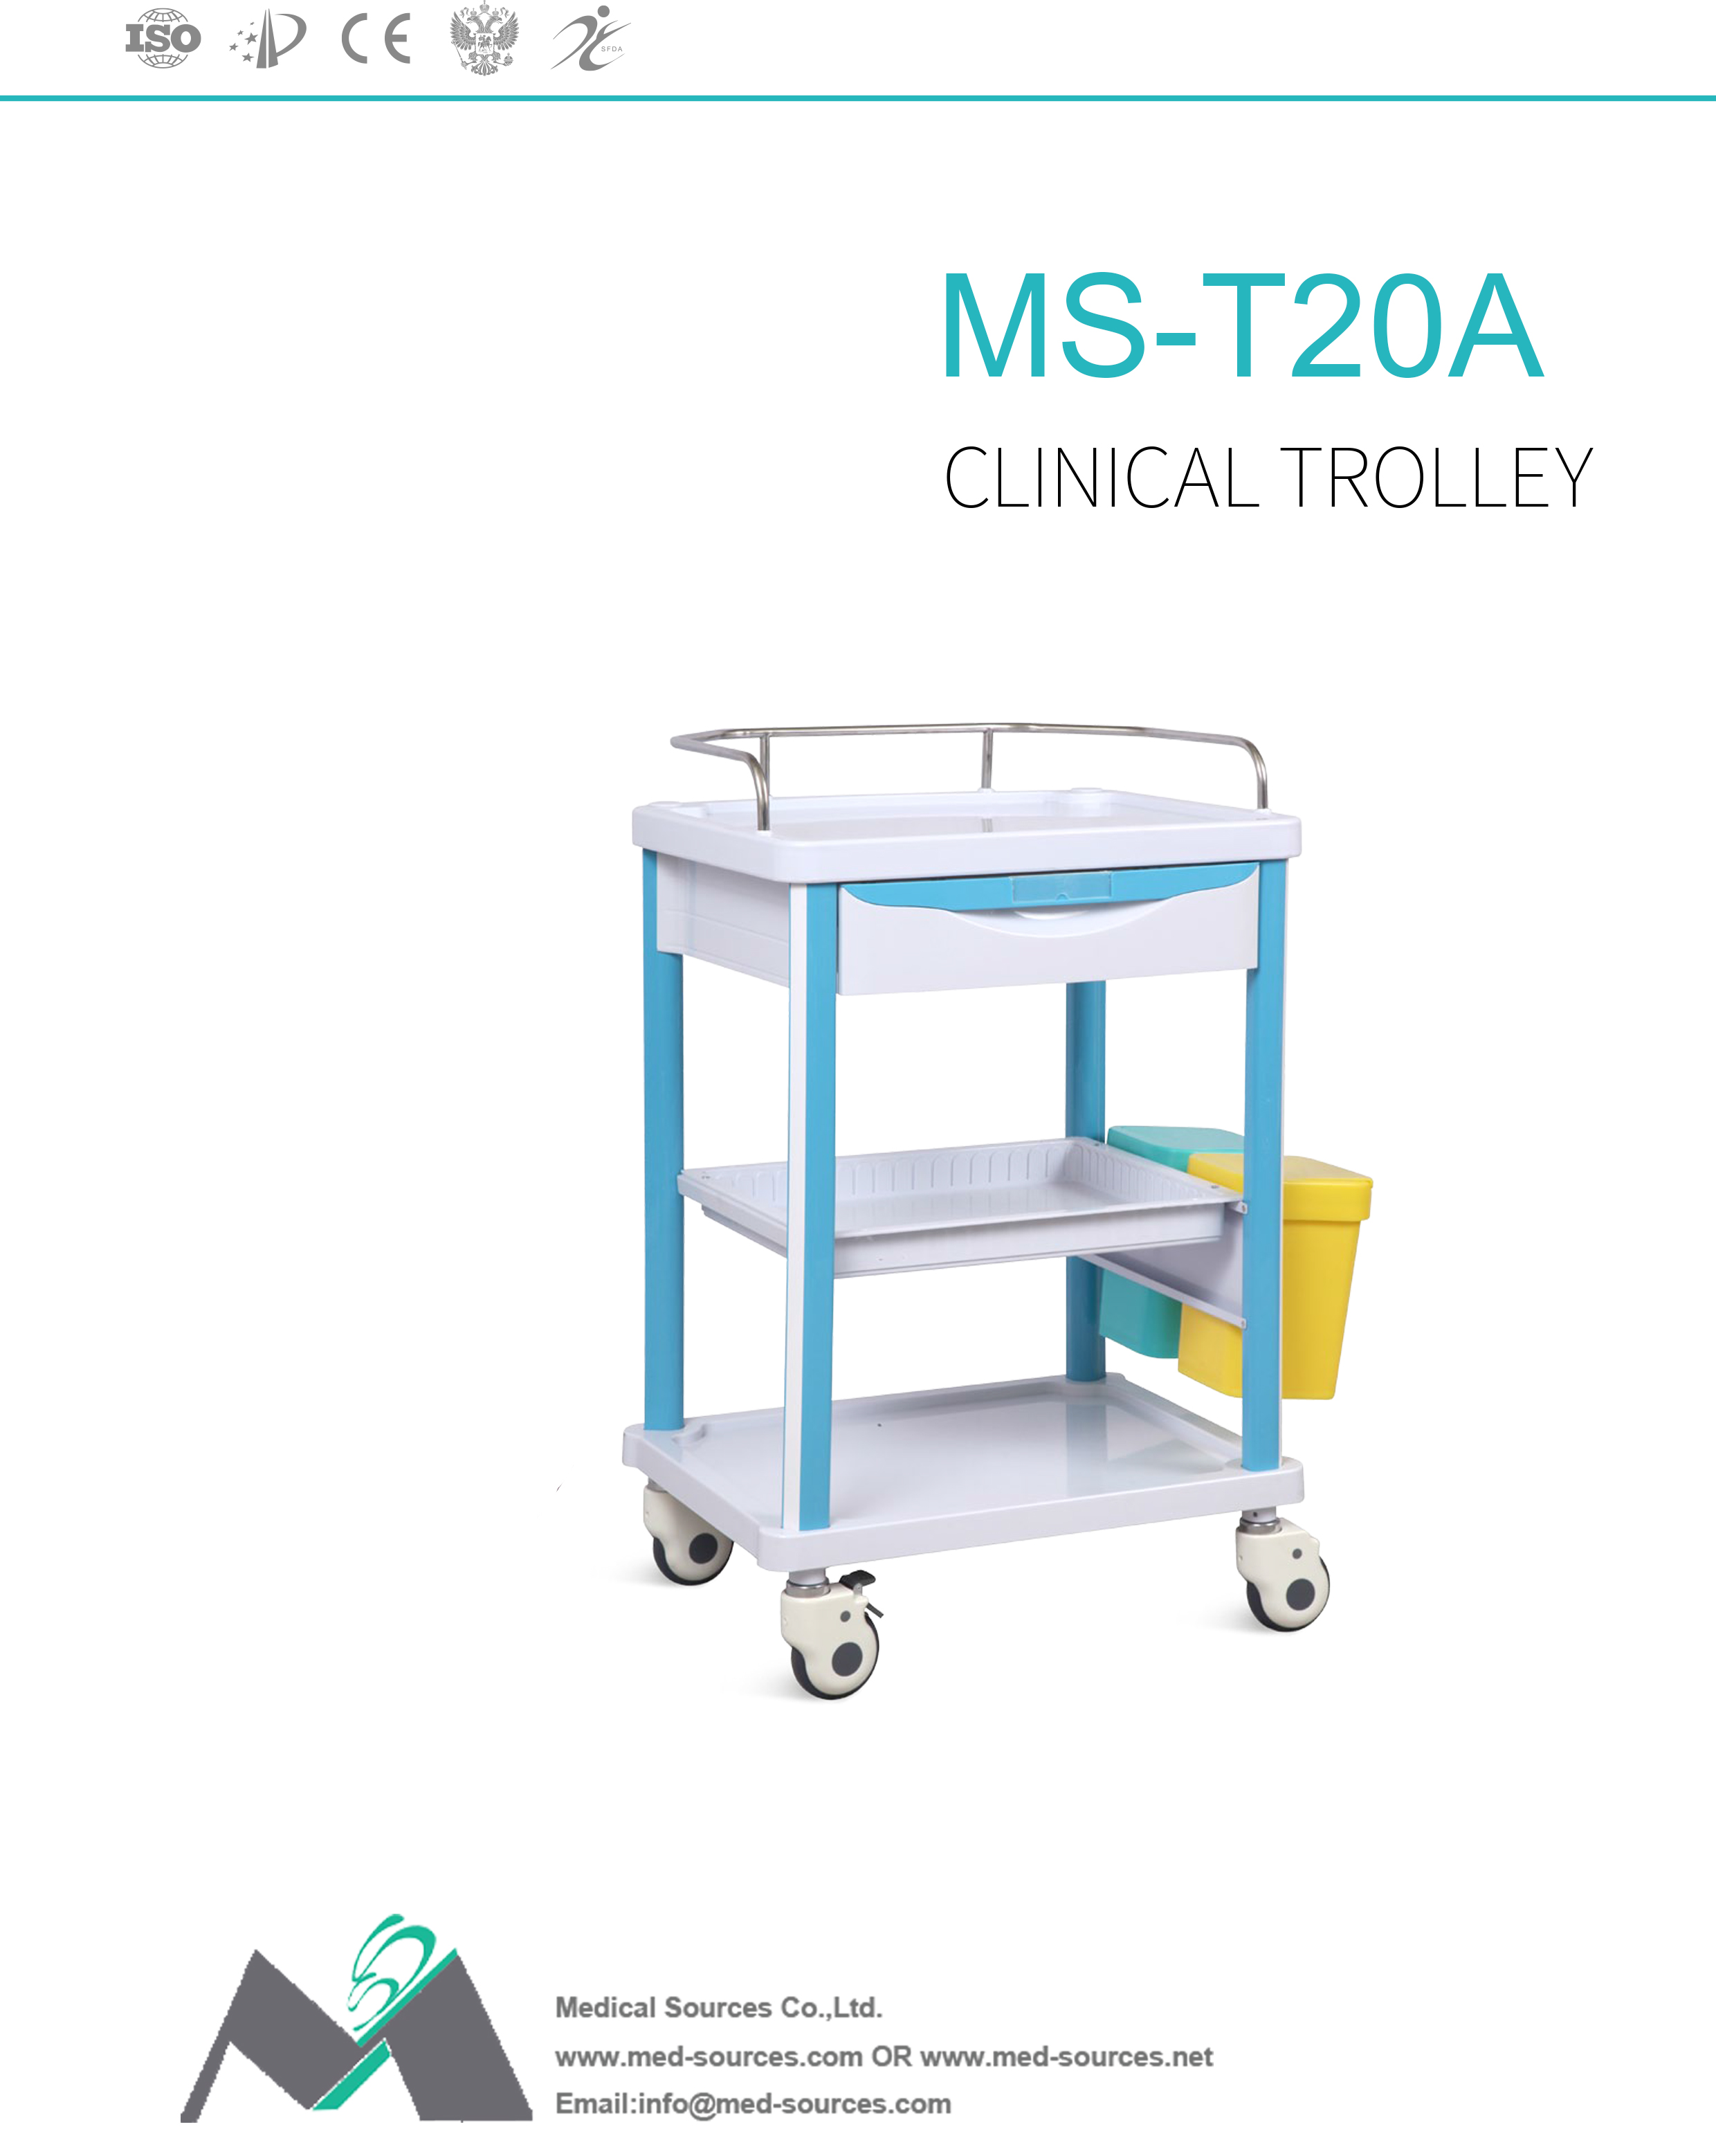 MS-T20A